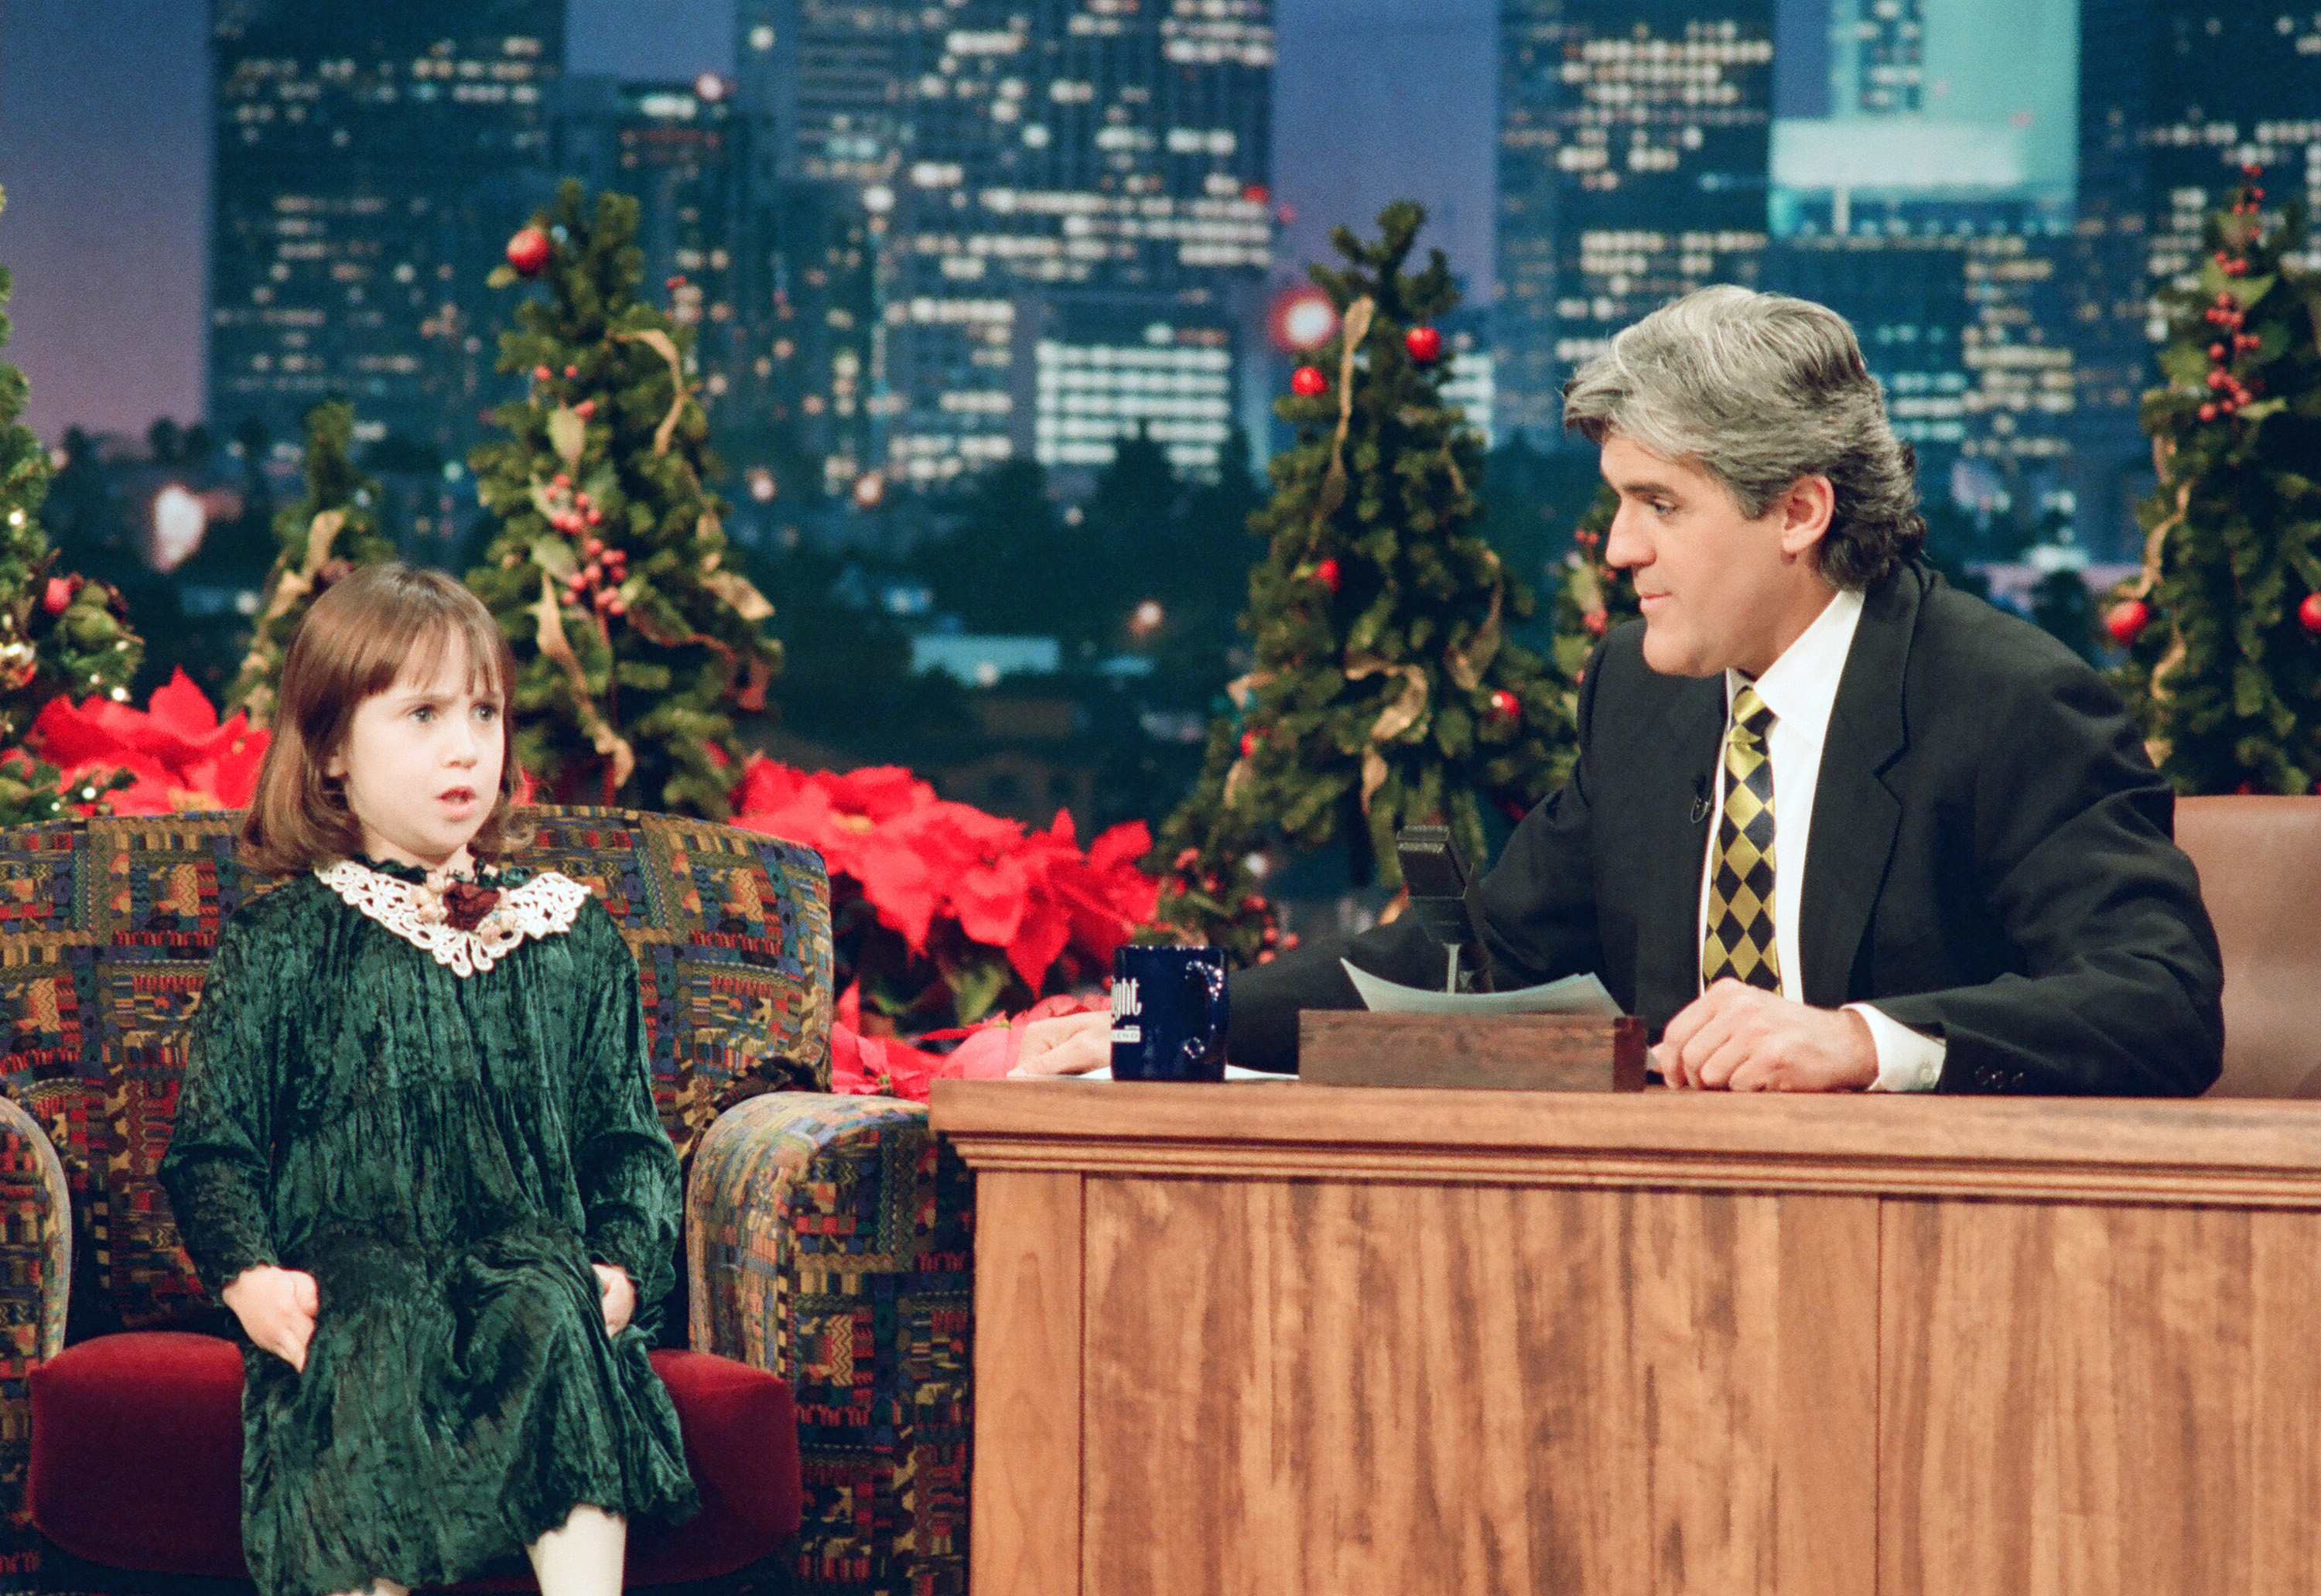 Mara Wilson during an interview on "The Tonight Show with Jay Leno" on December 13, 1994  | Source: Getty Images